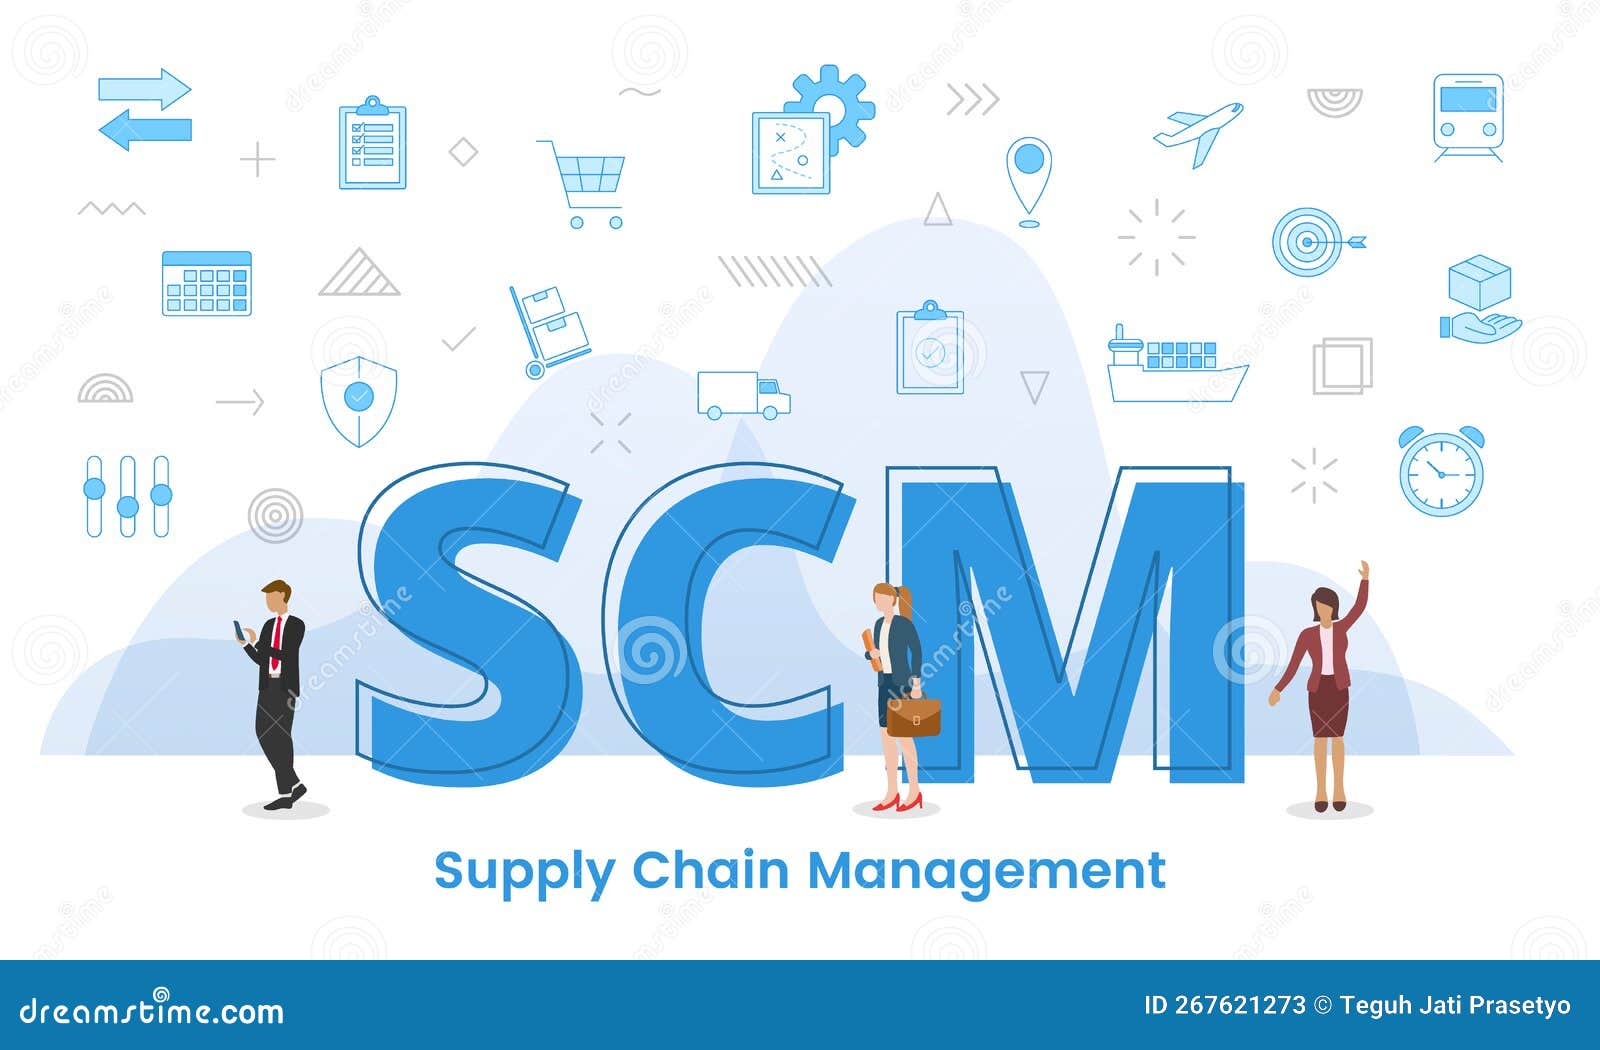 Scm Supply Chain Management Concept With Big Words And People